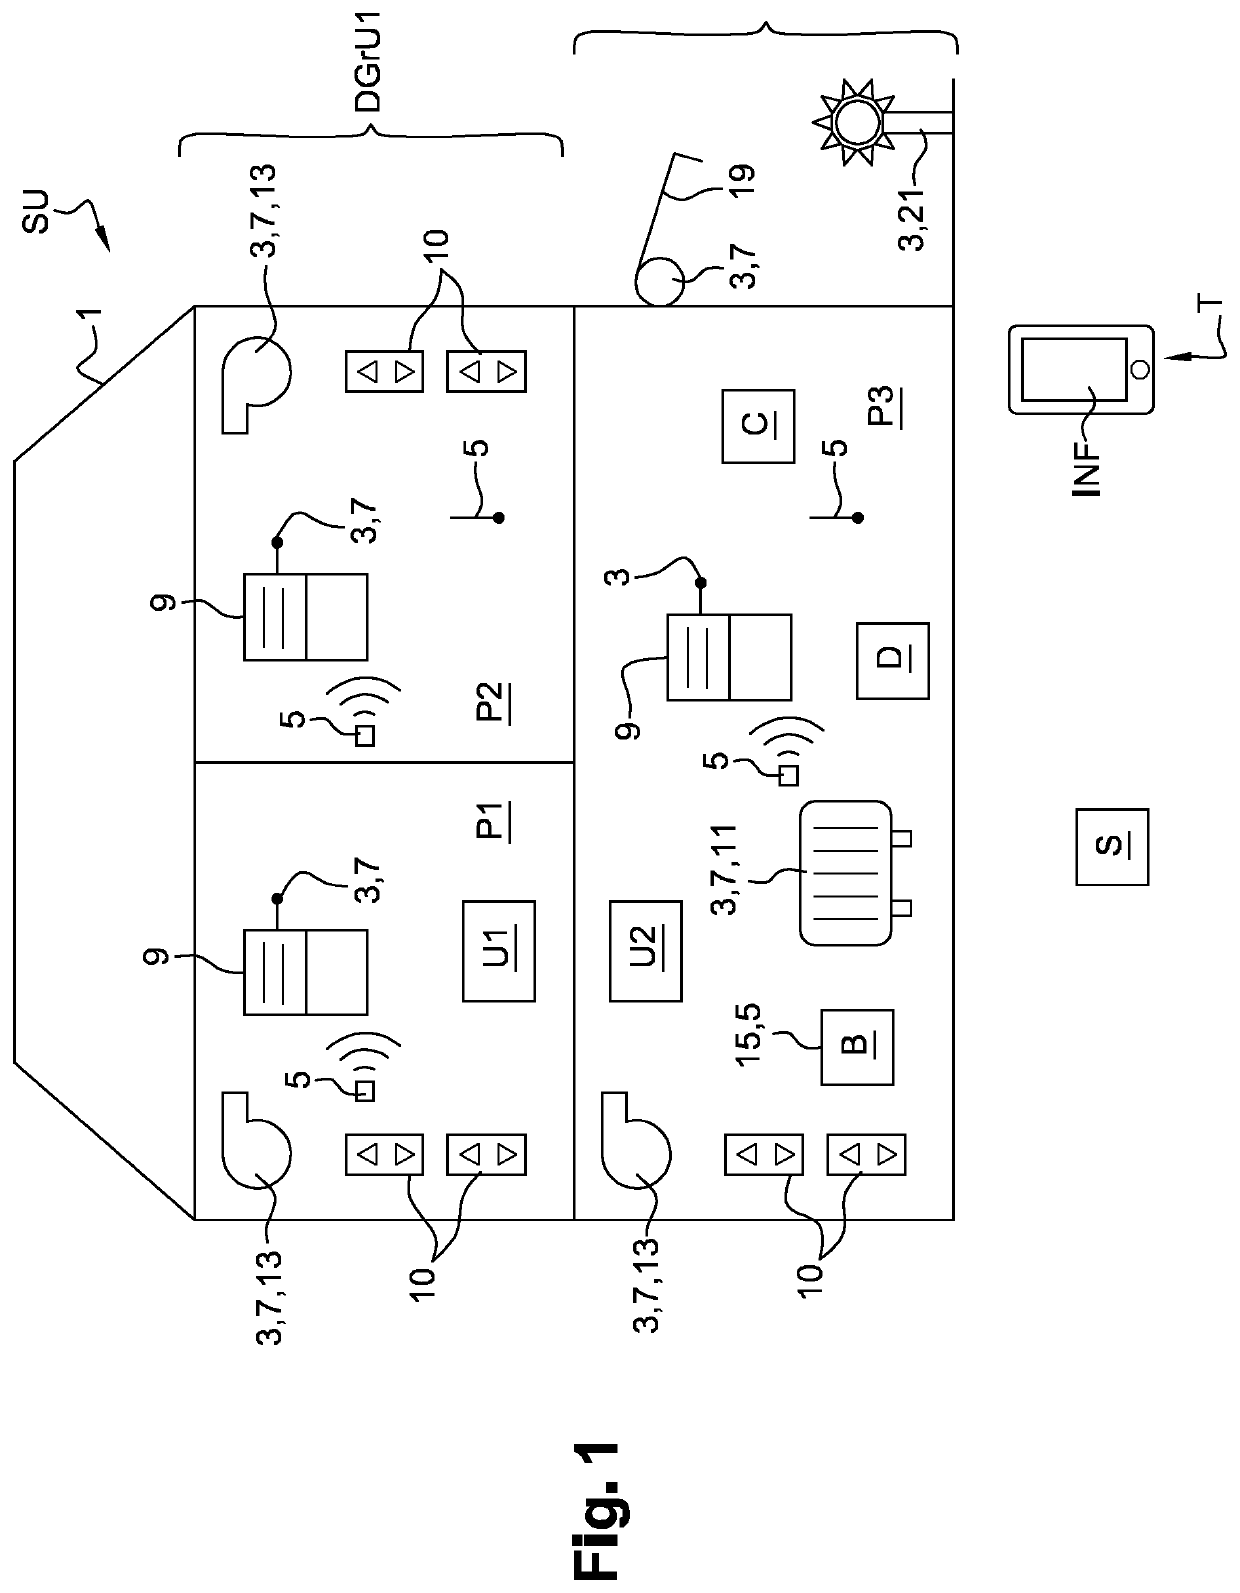 Method for configuring and supervising a home automation installation